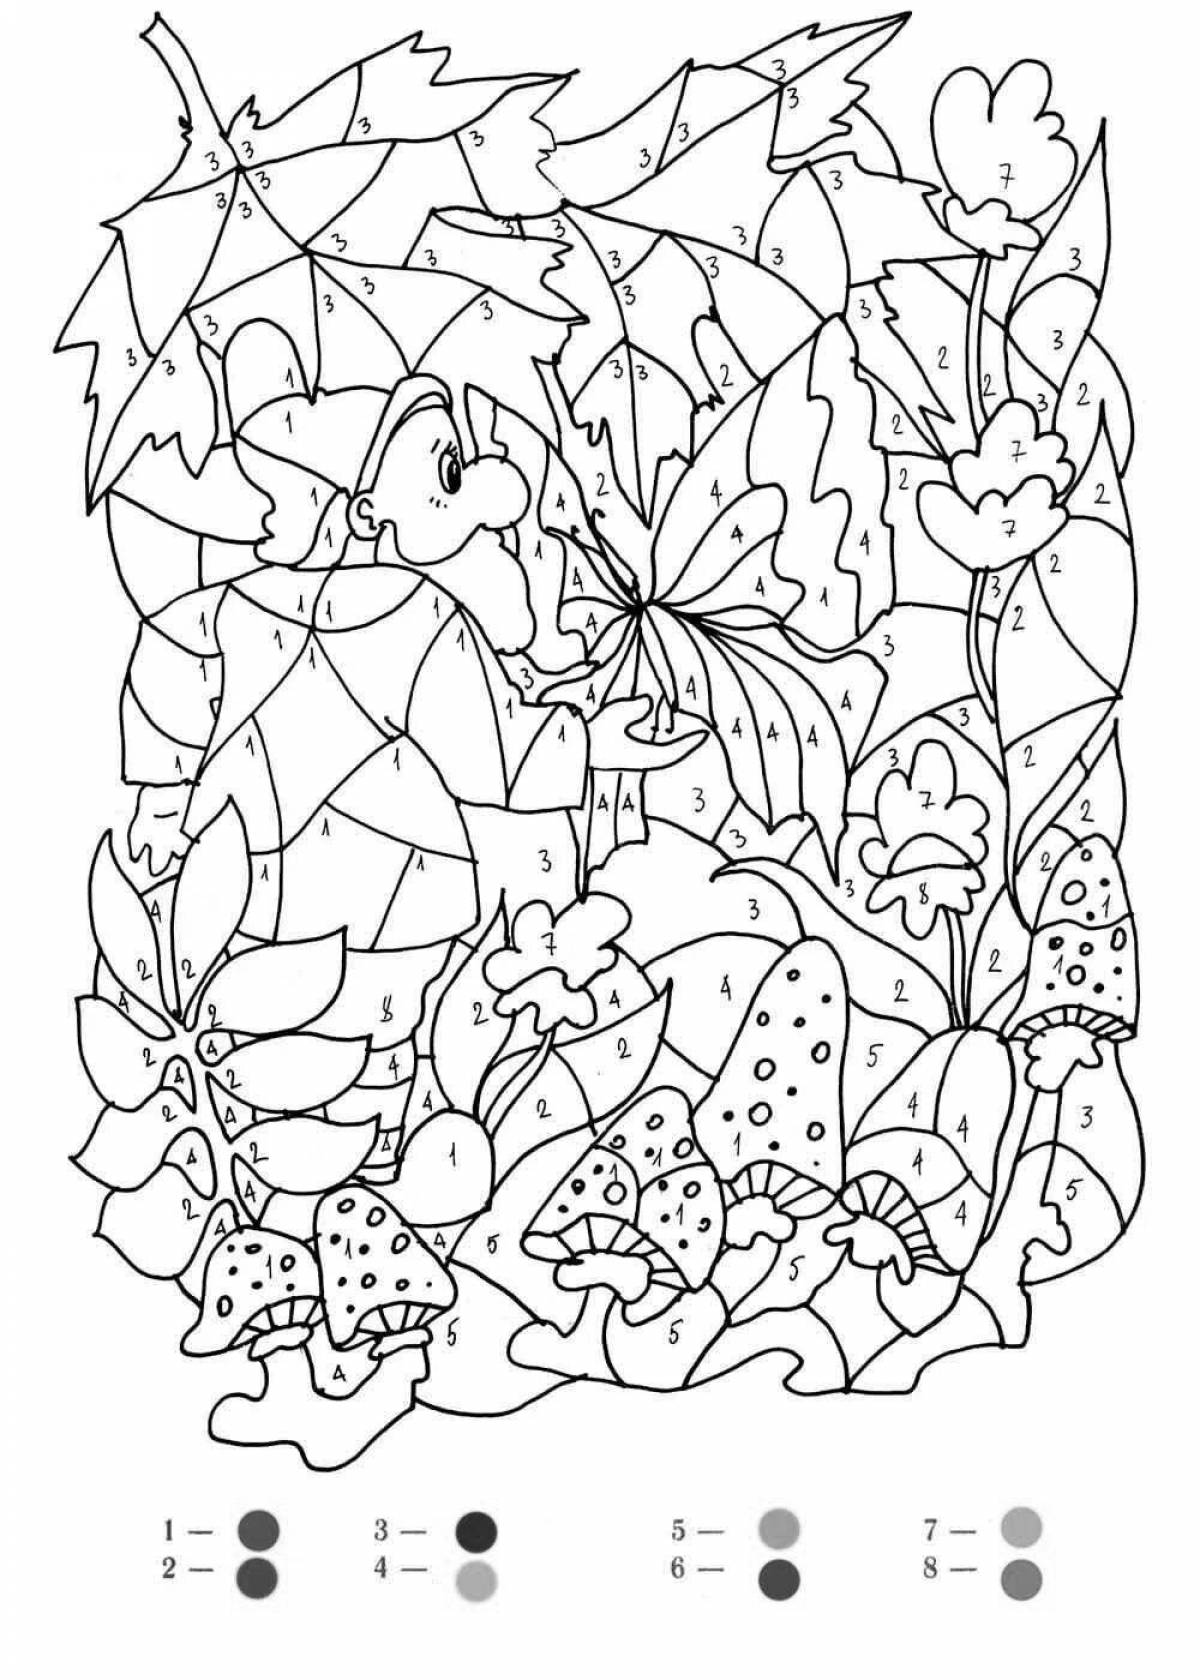 Furious coloring by numbers on the phone